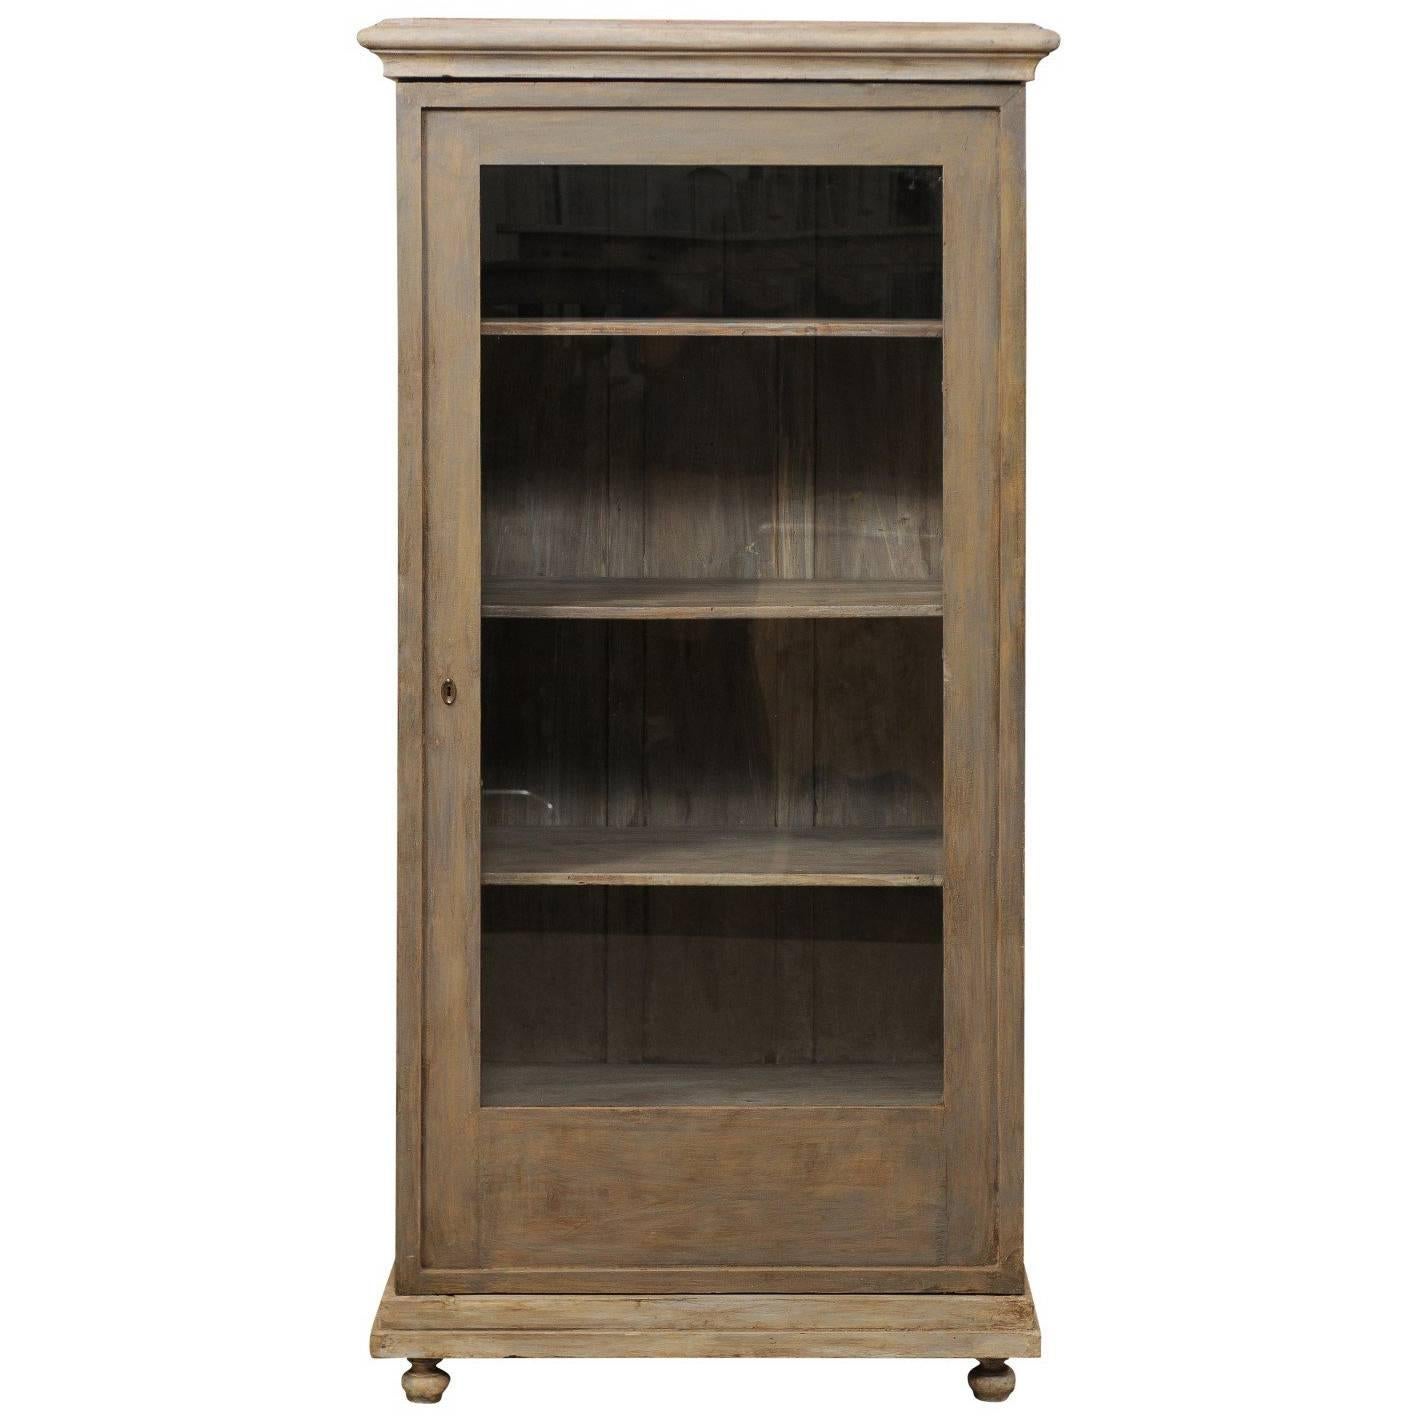 European Painted Wood Vitrine or Cabinet with Glass Front and Adjustable Shelves